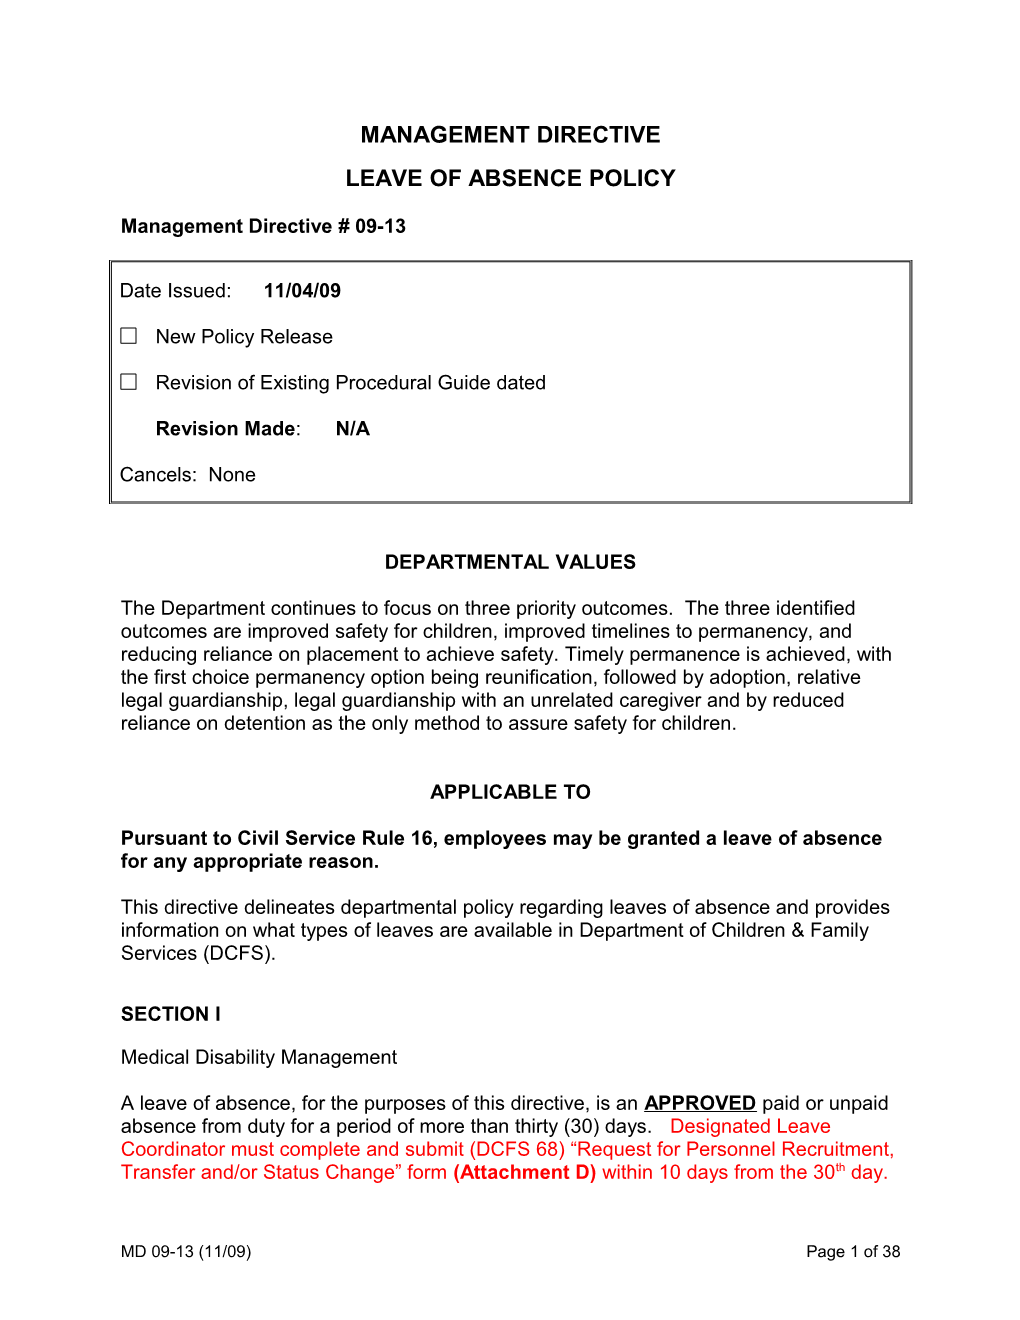 MD 09-13, Leave of Absence Policy